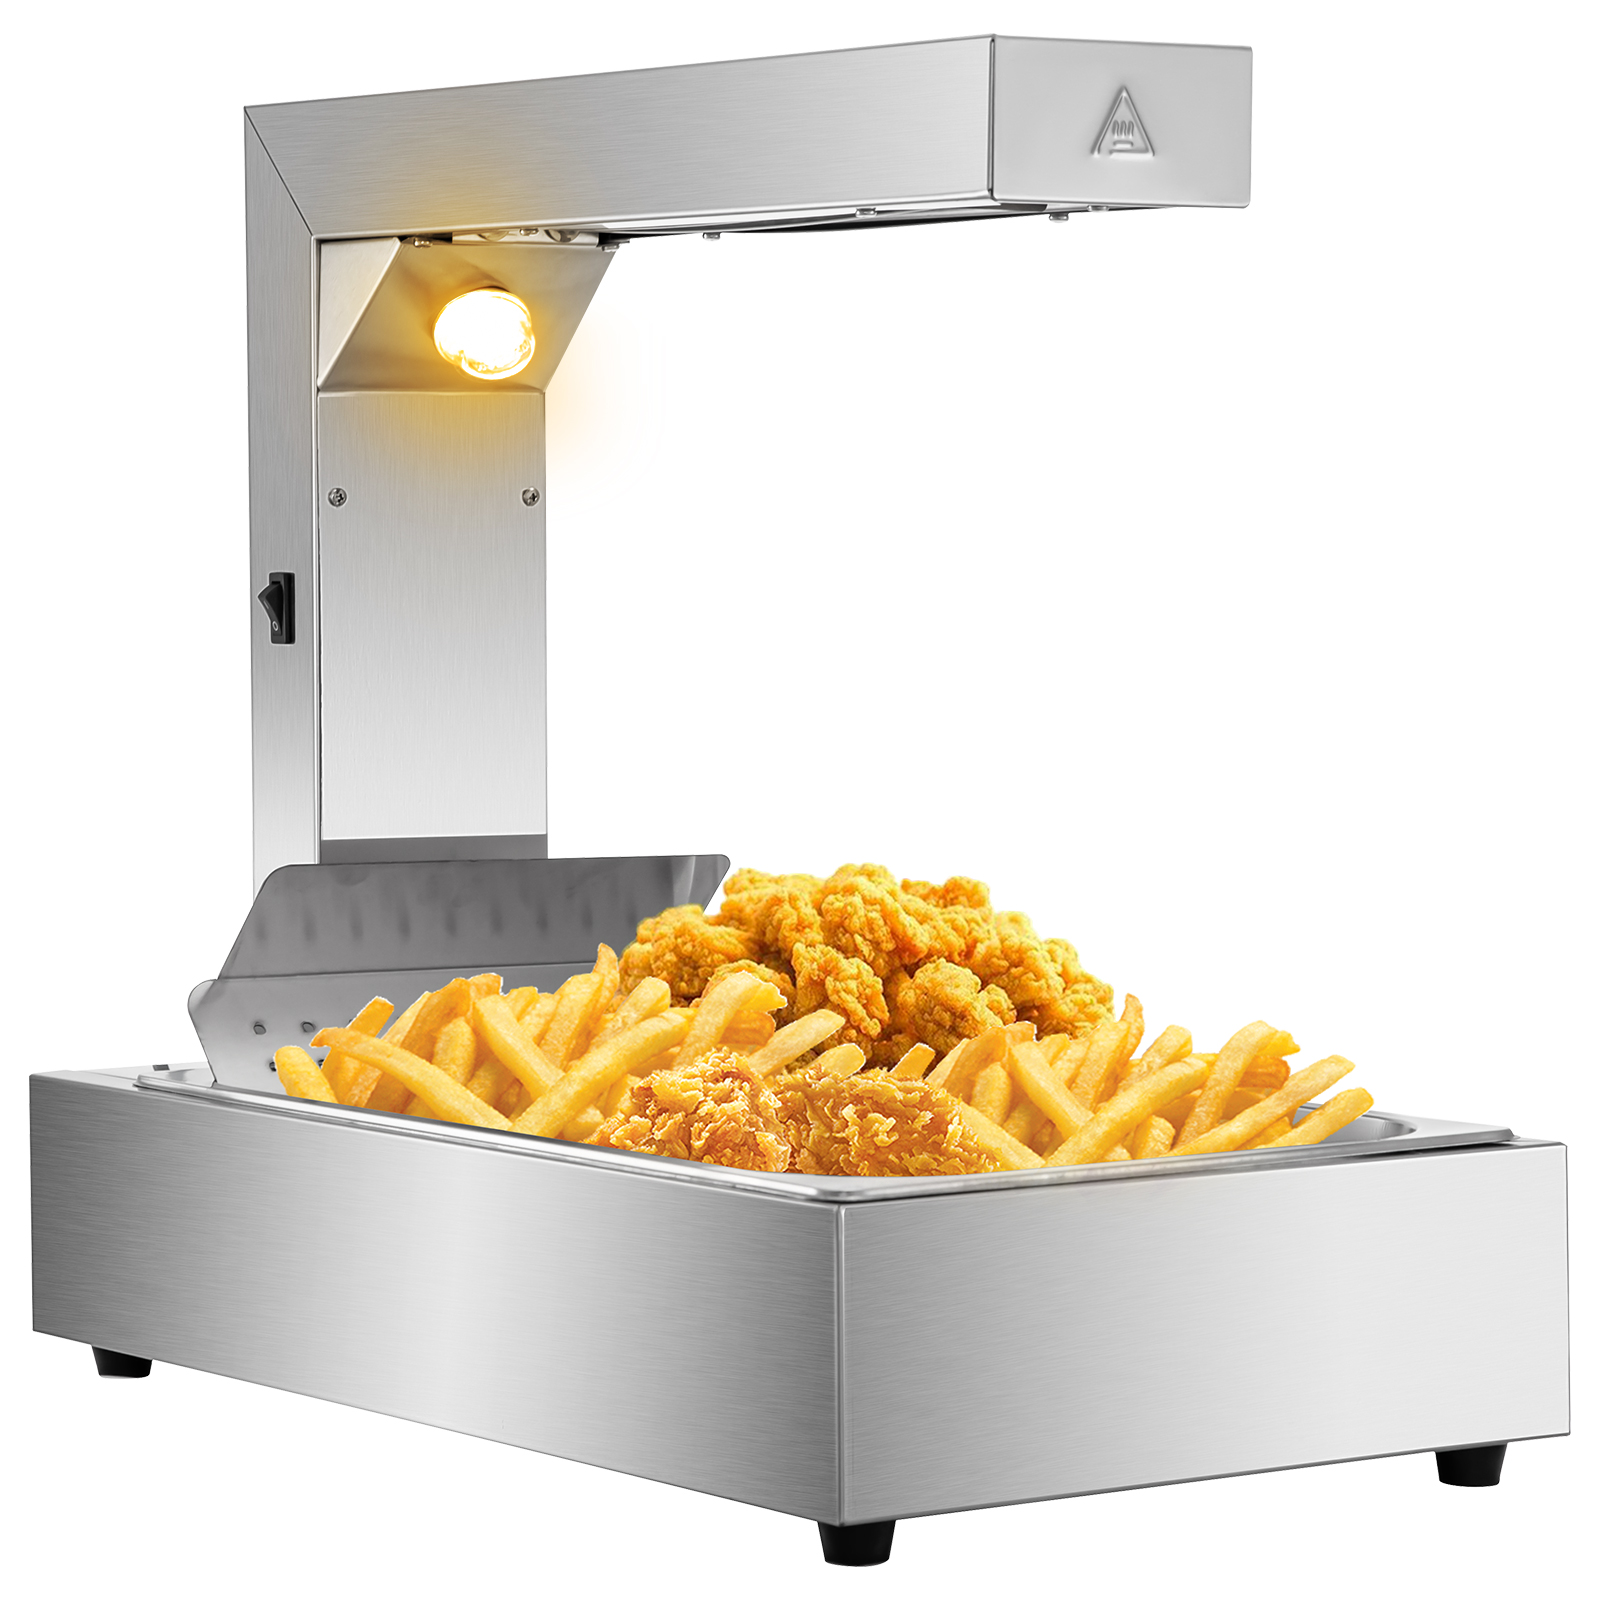 Trailer FRENCH FRIES Diamond Concession Sign Stand 12" x 12" 2 sided 